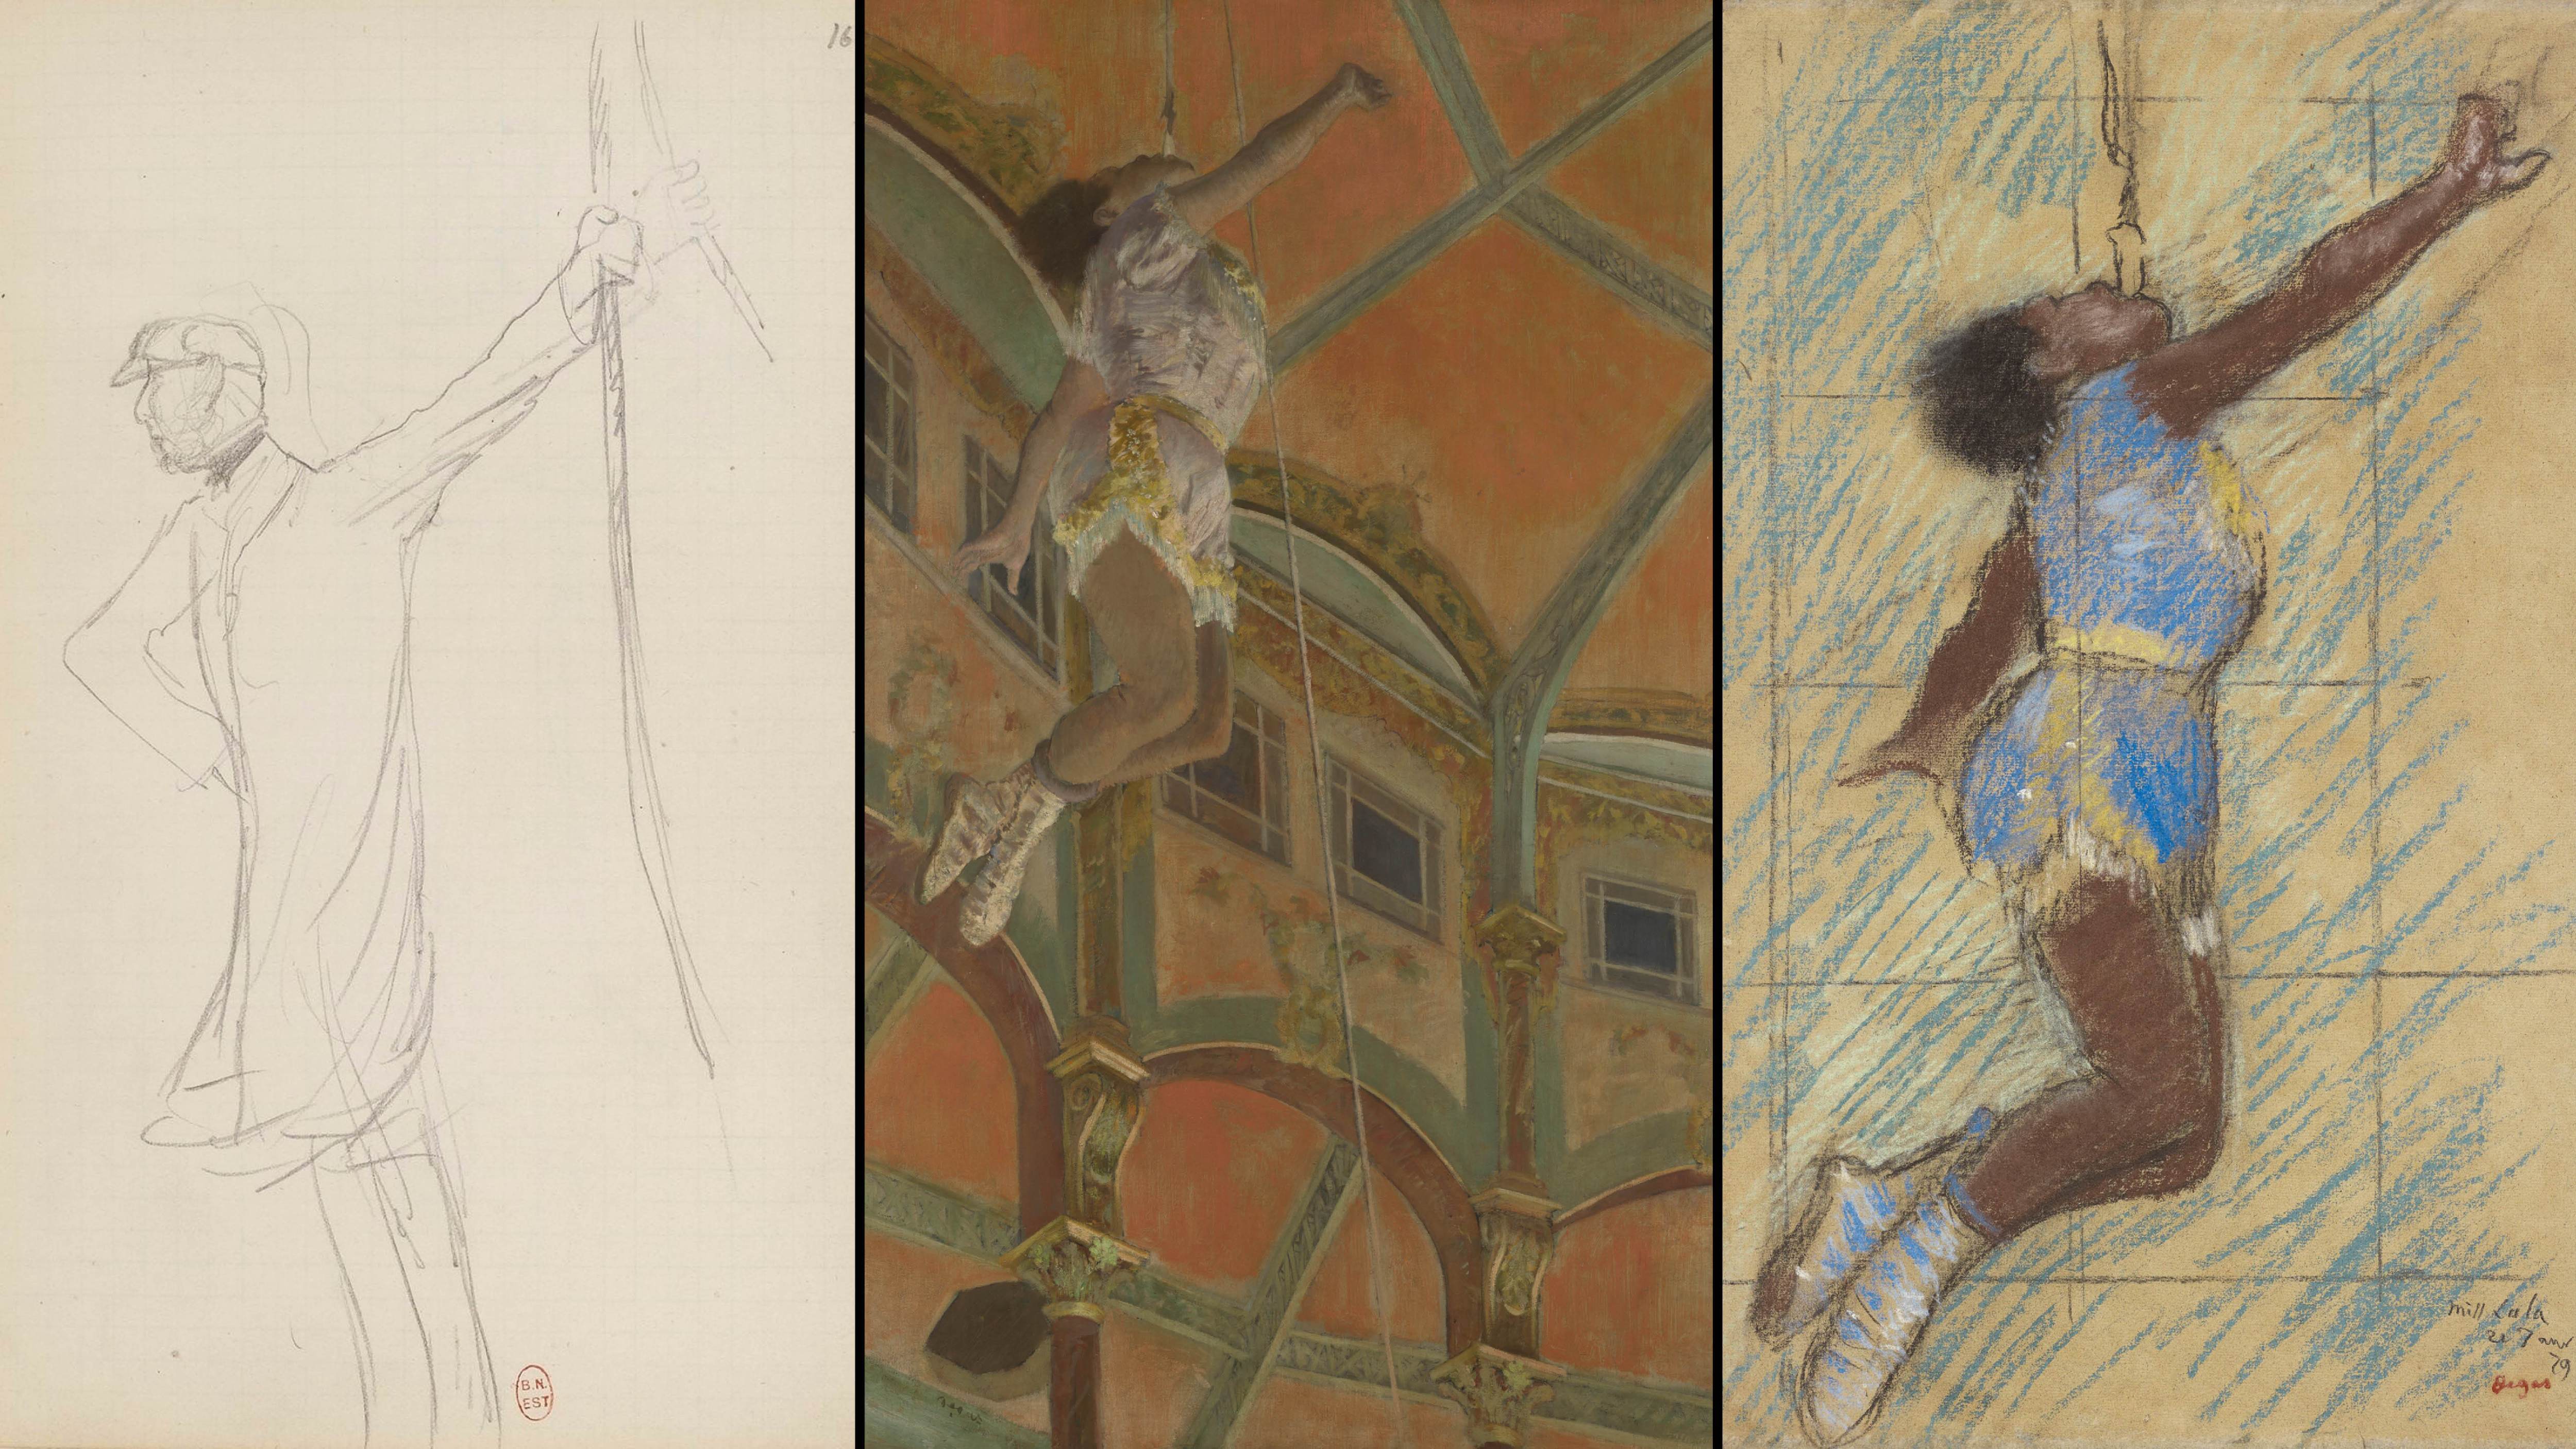 From left: Carnet no. 24; two versions of Miss Lala at the Cirque Fernando, 1879, by Edgar Degas. The latter our critic regards as one of the wilder paintings in the National Gallery’s collection